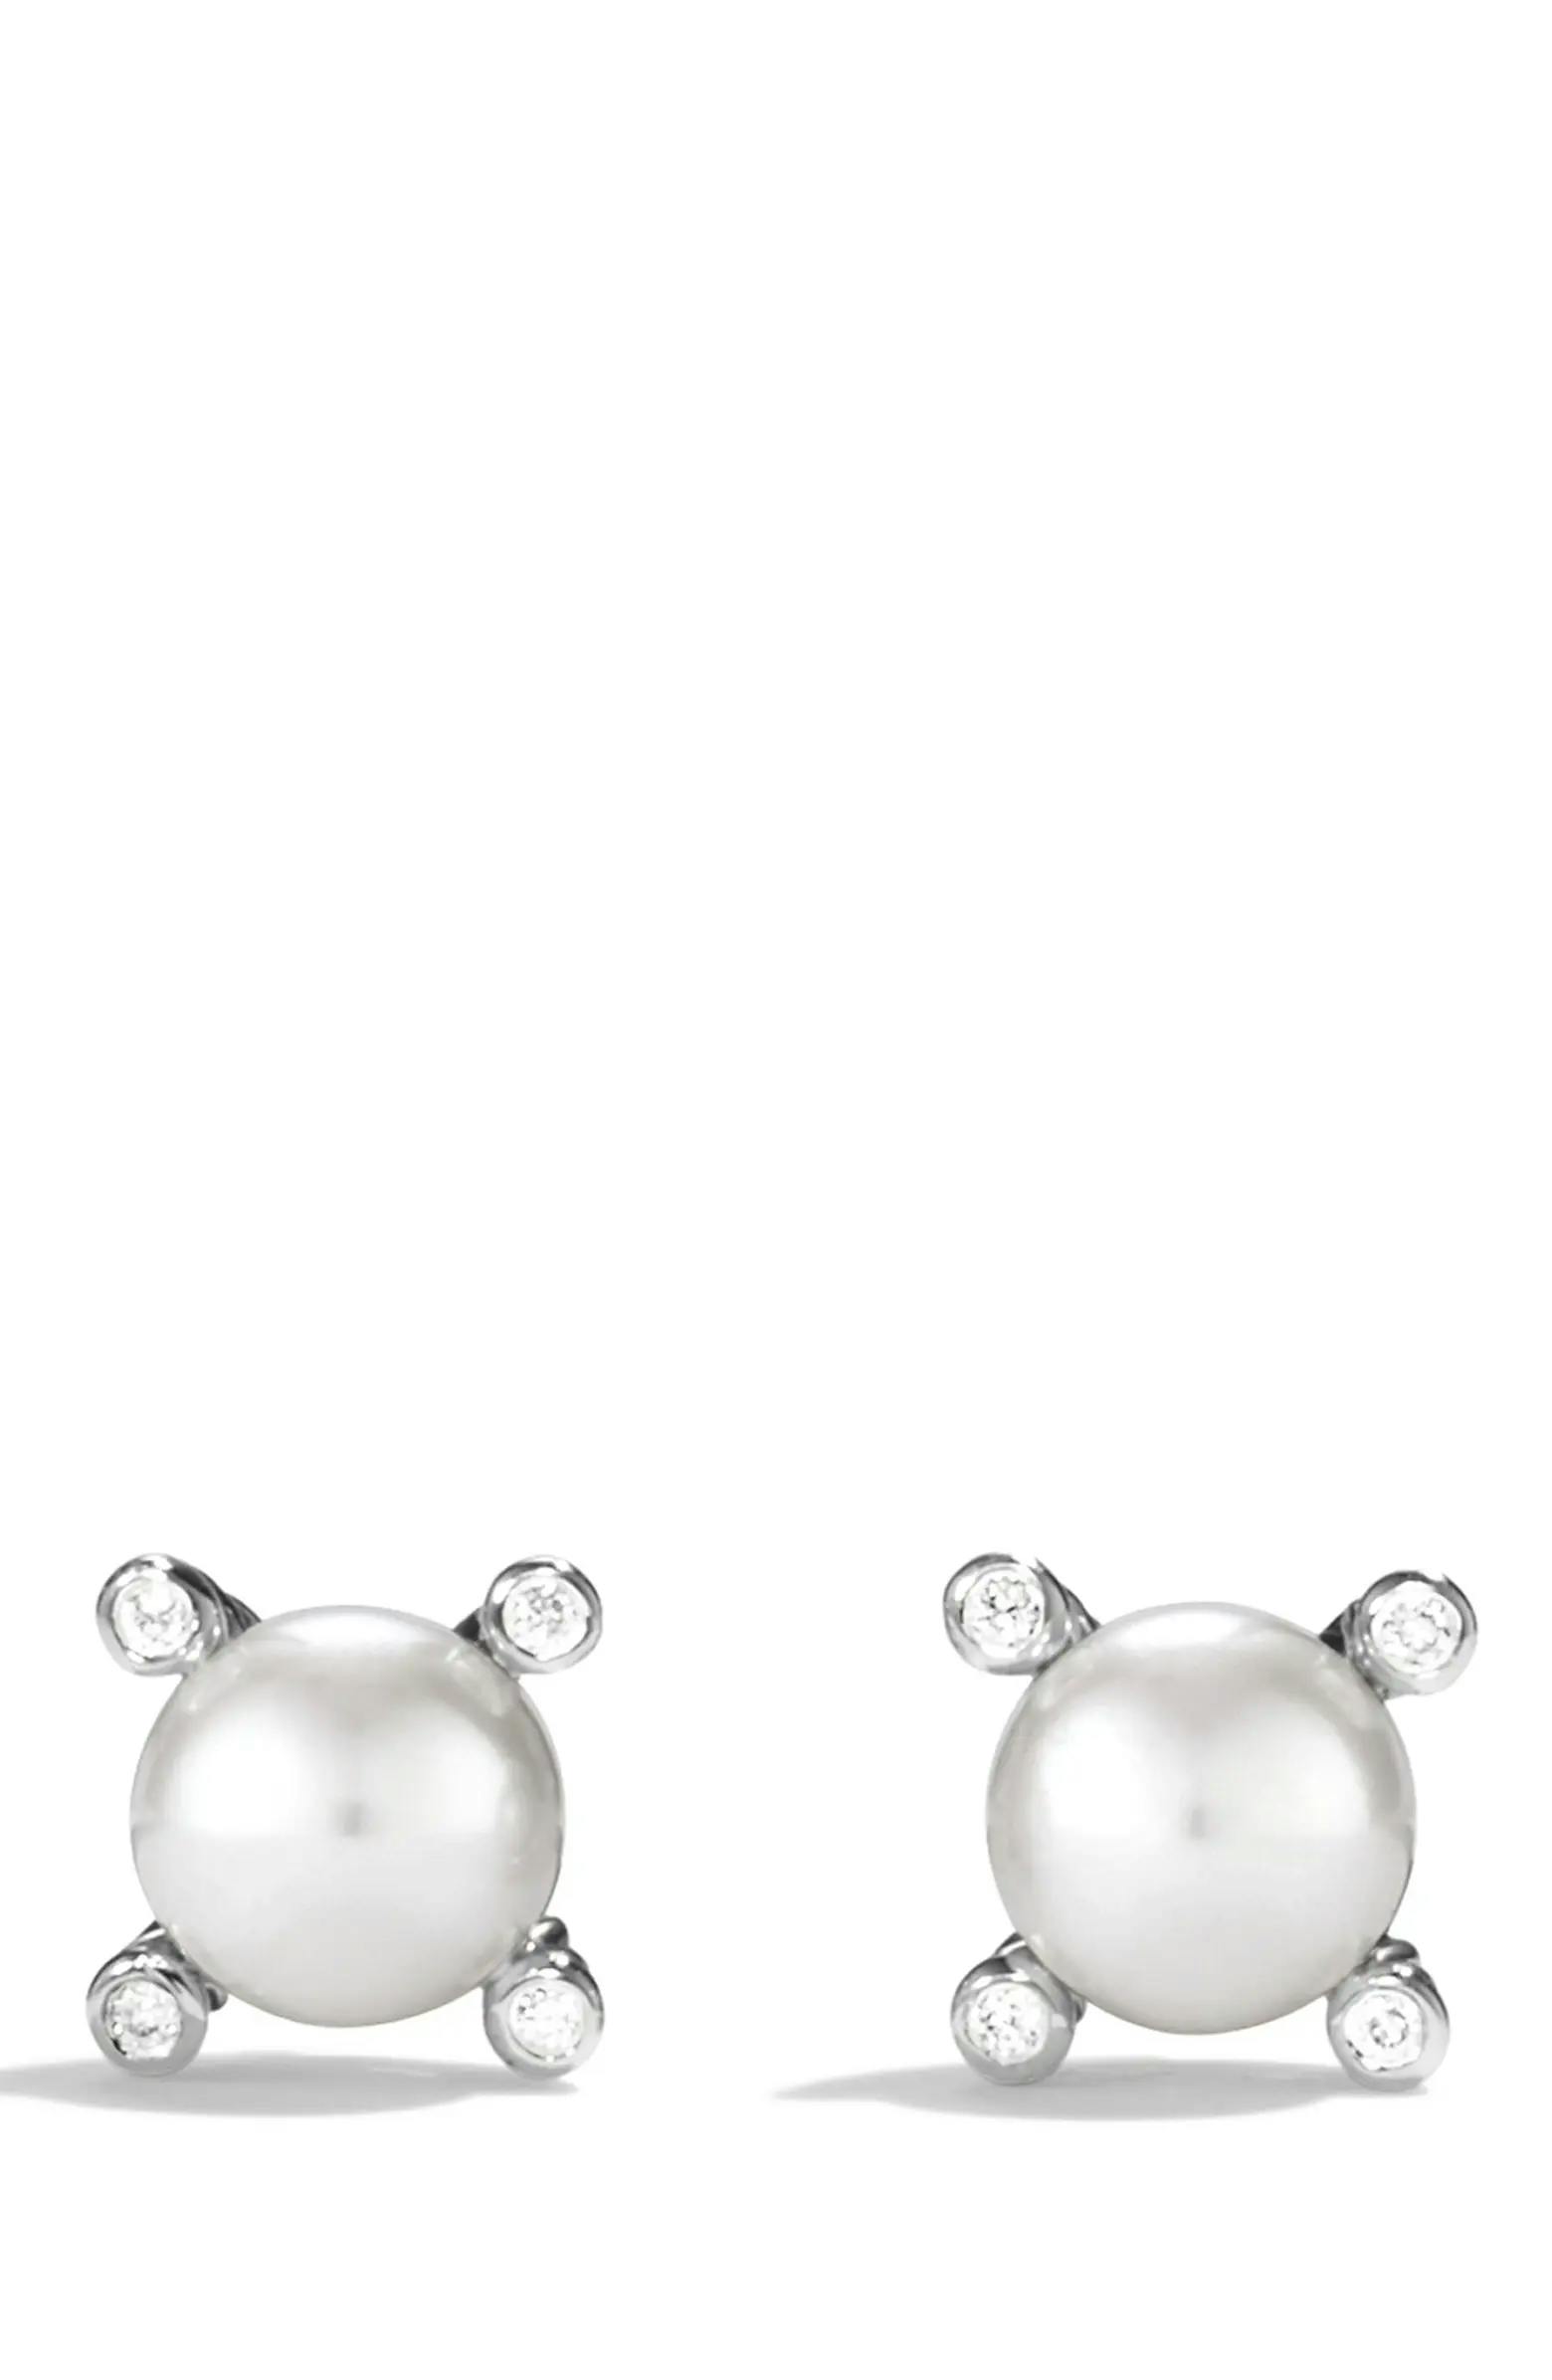 Small pearl earrings with diamonds